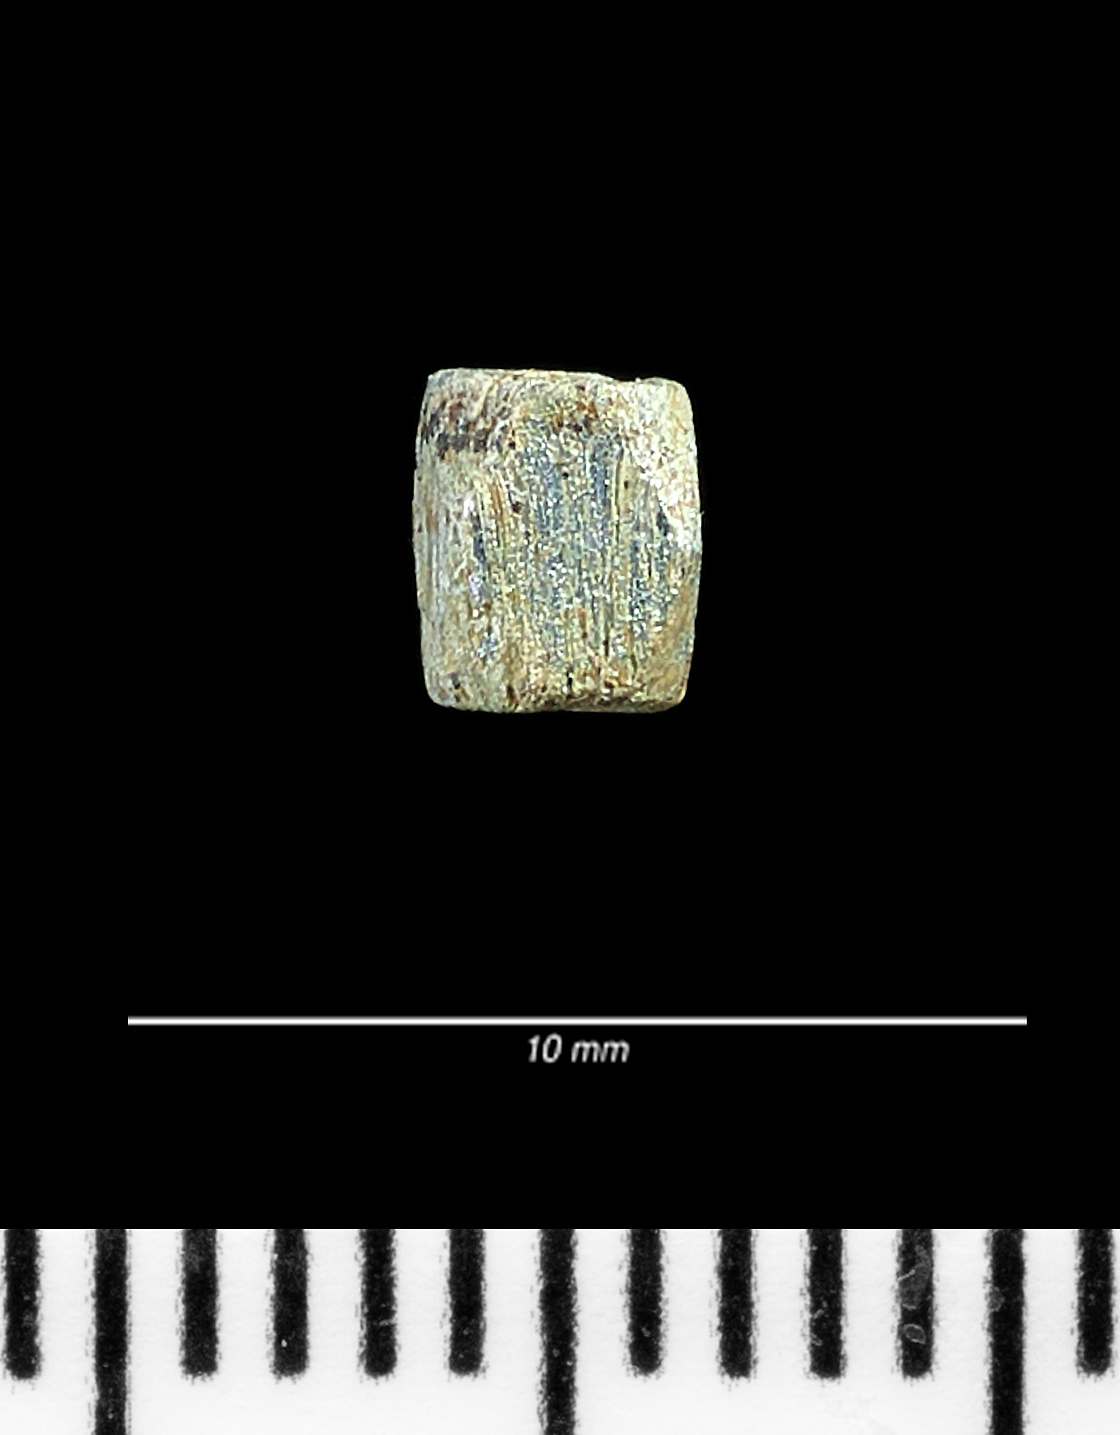 Roman glass square sectioned bead